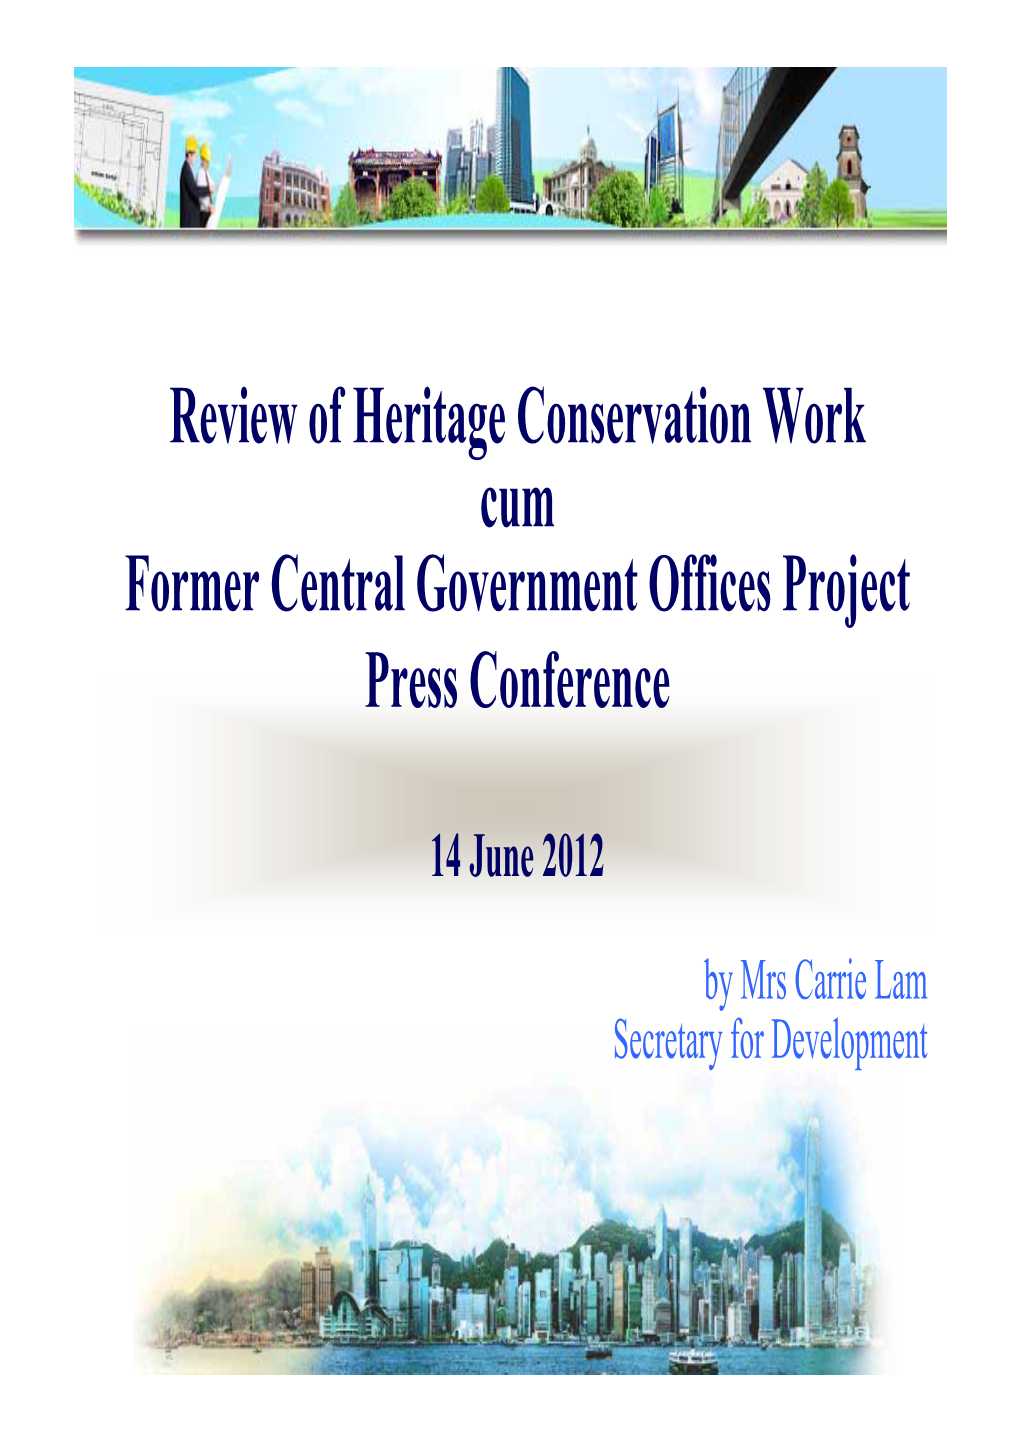 Former Central Government Offices Project Press Conference